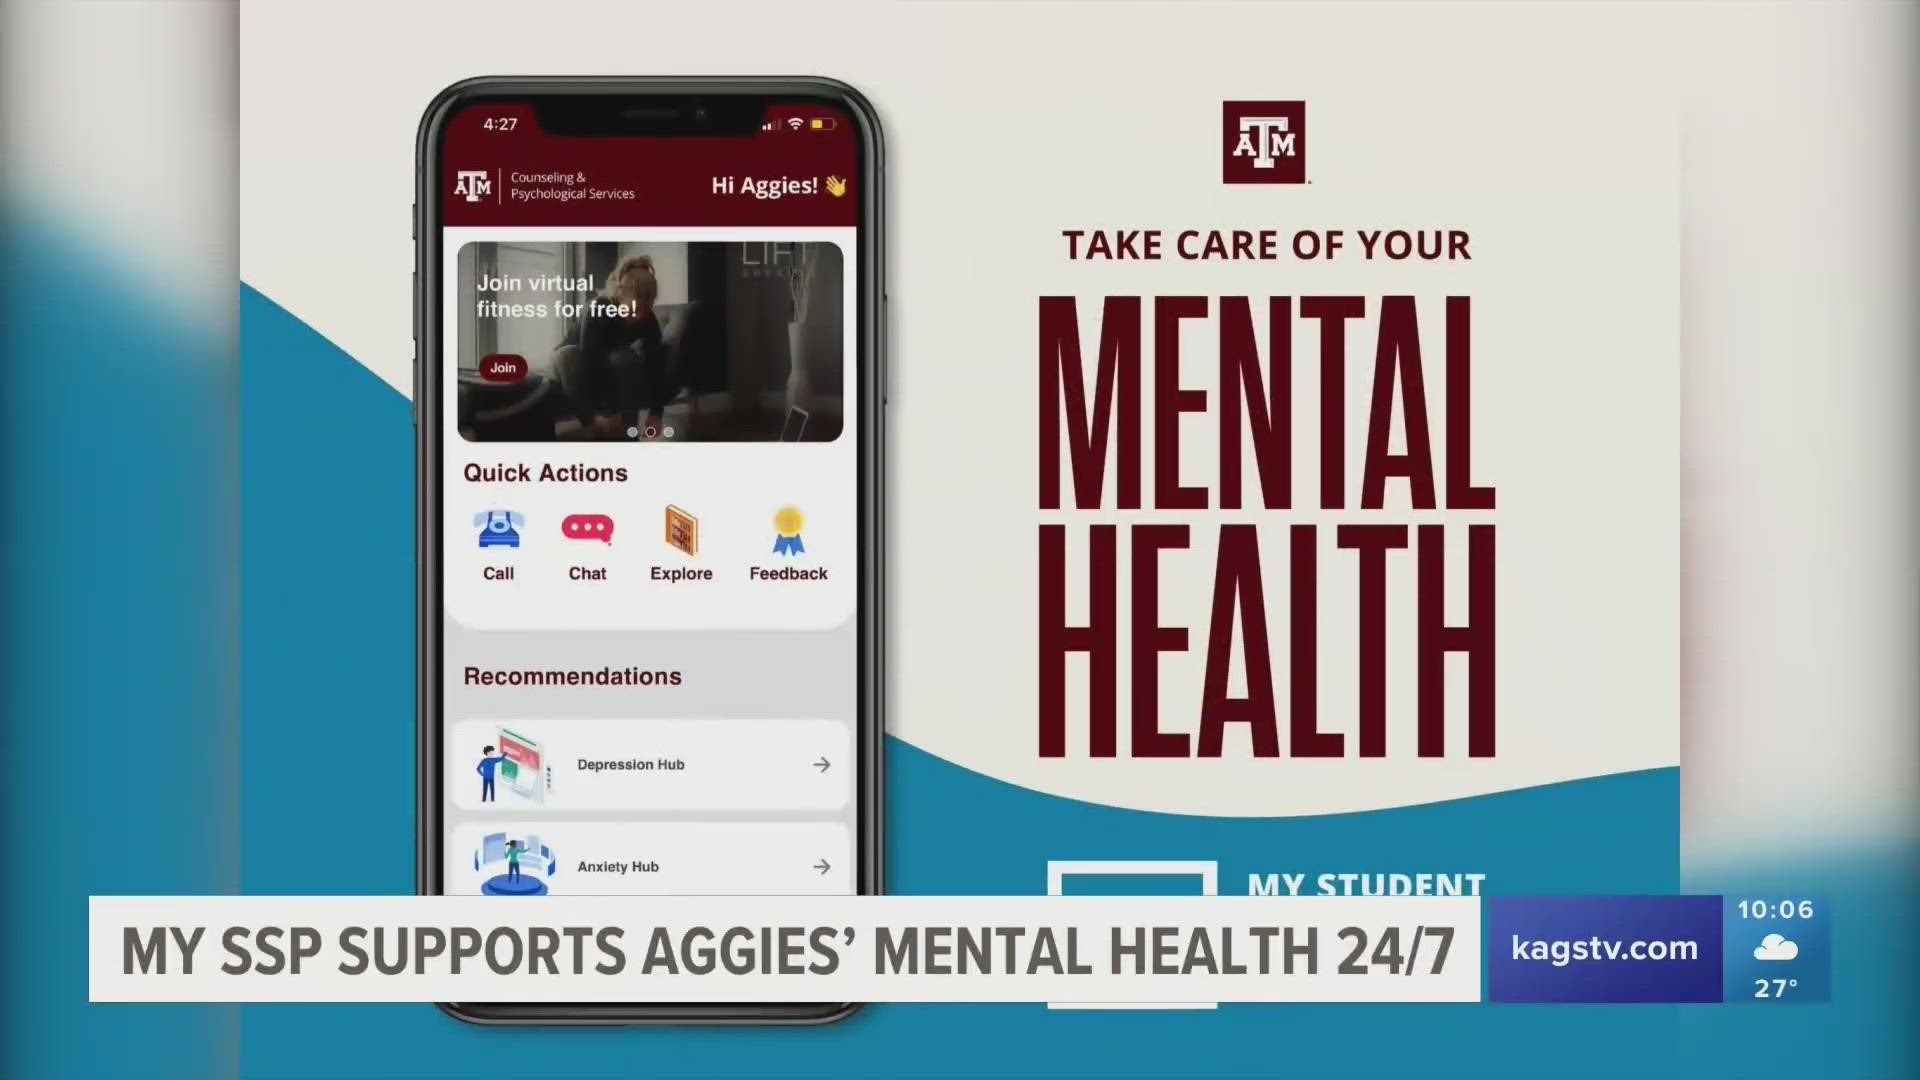 In collaboration with the third-party app My SSP, Texas A&M University is helping aggie students better understand and work on their mental health.